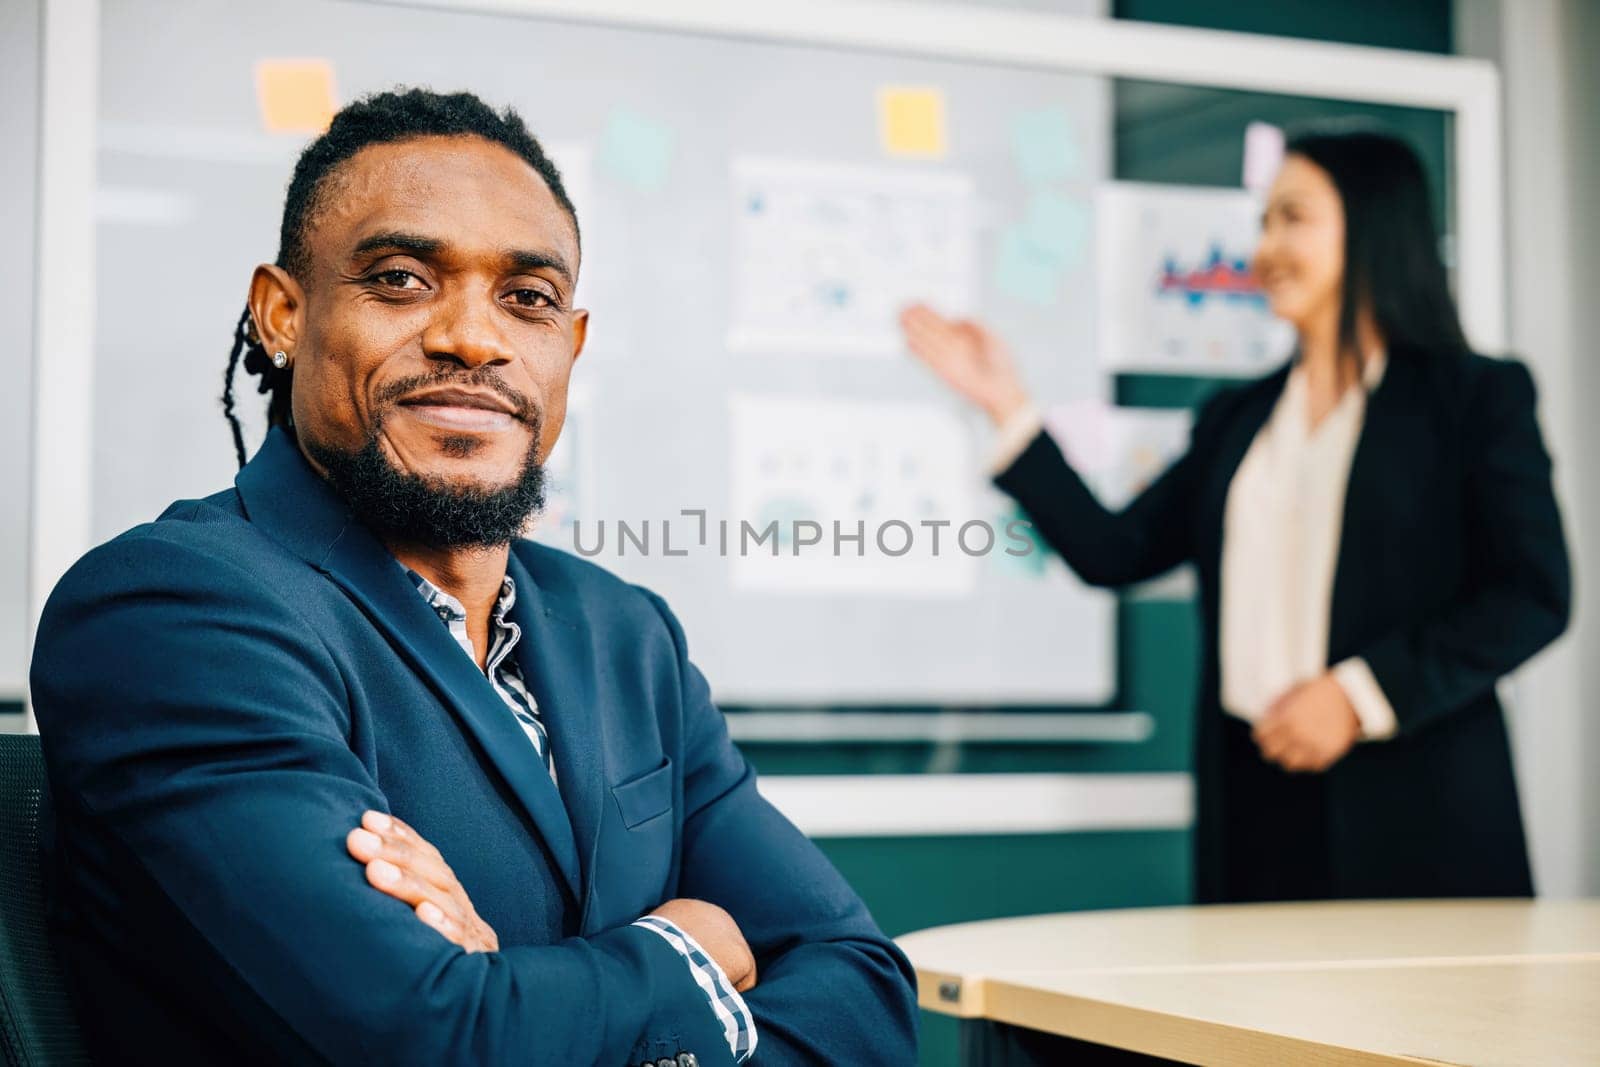 Confident and successful, black businessman, CEO and leader, is at team meeting in an office. He smiles, reflecting leadership in a diverse workplace. A portrait of excellence in corporate leadership.